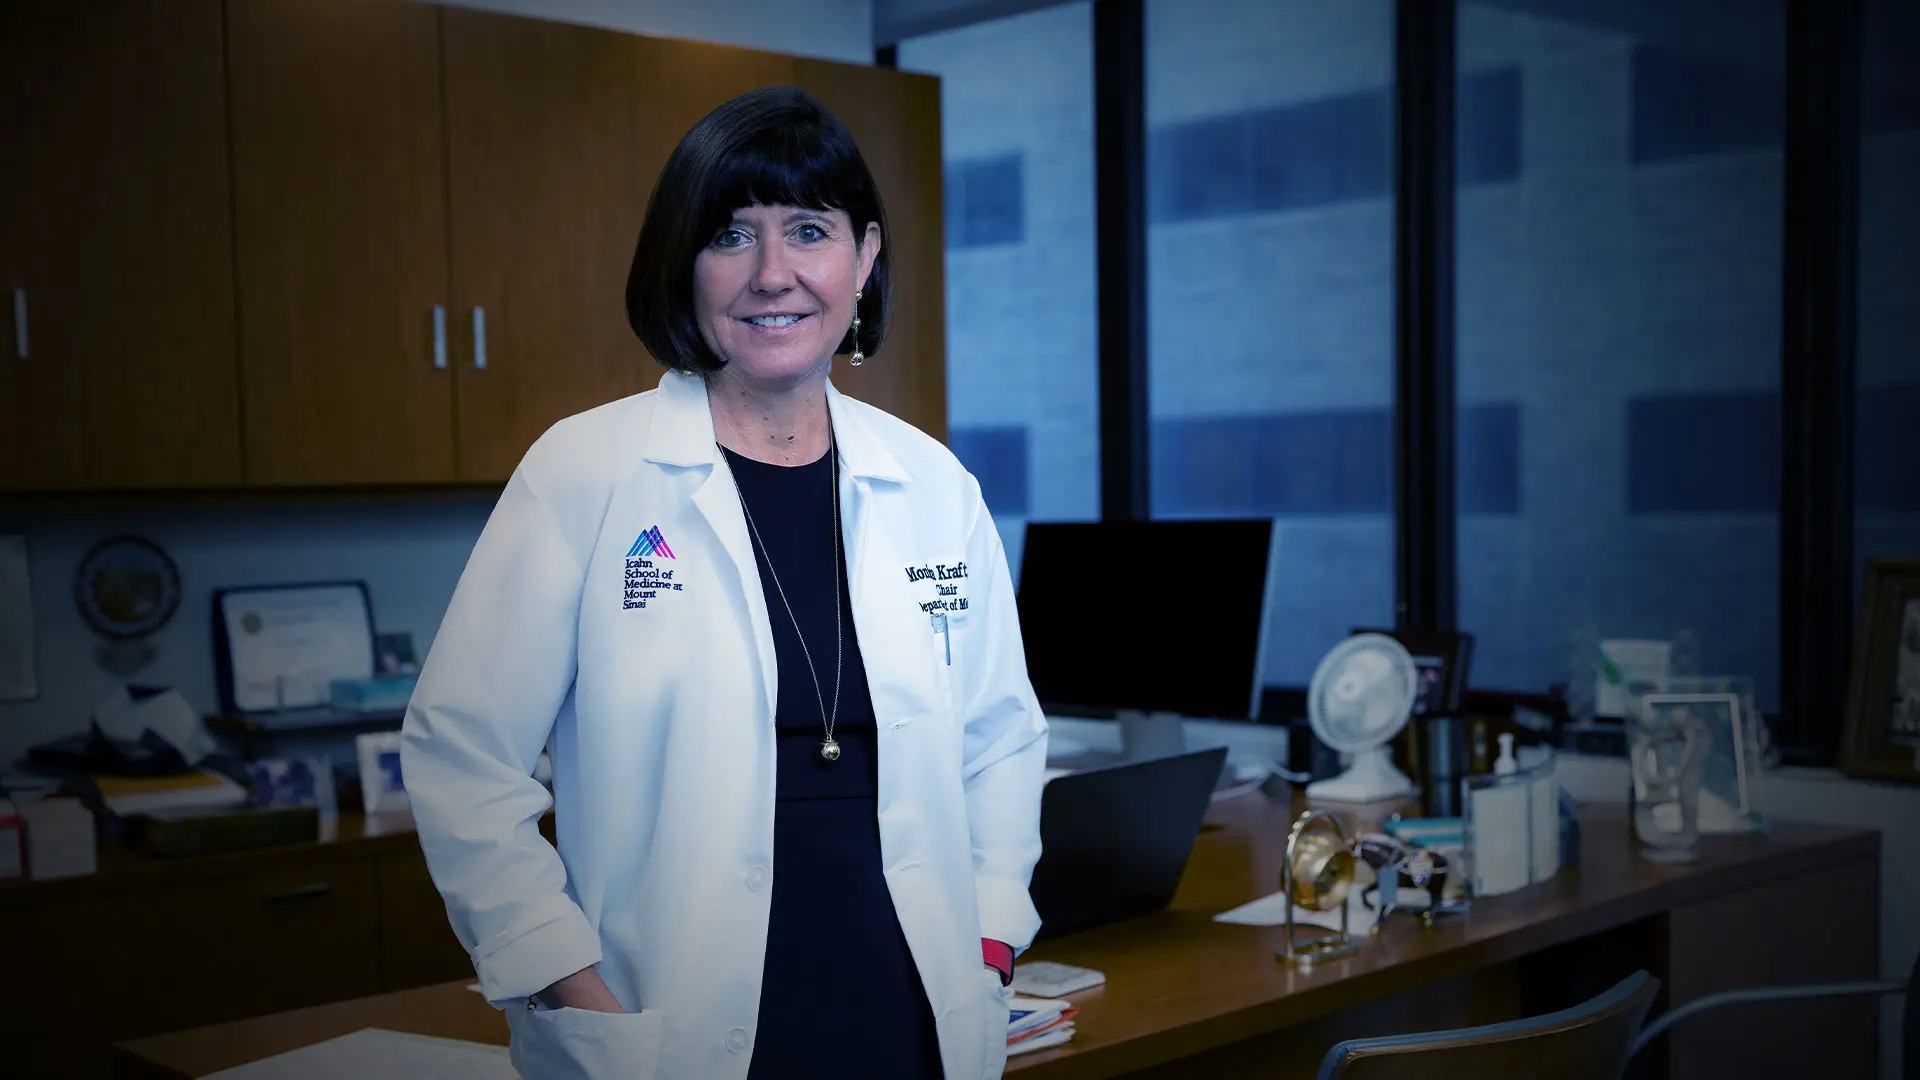 Asthma and COPD Expert Is Mount Sinai's New Chair of Medicine